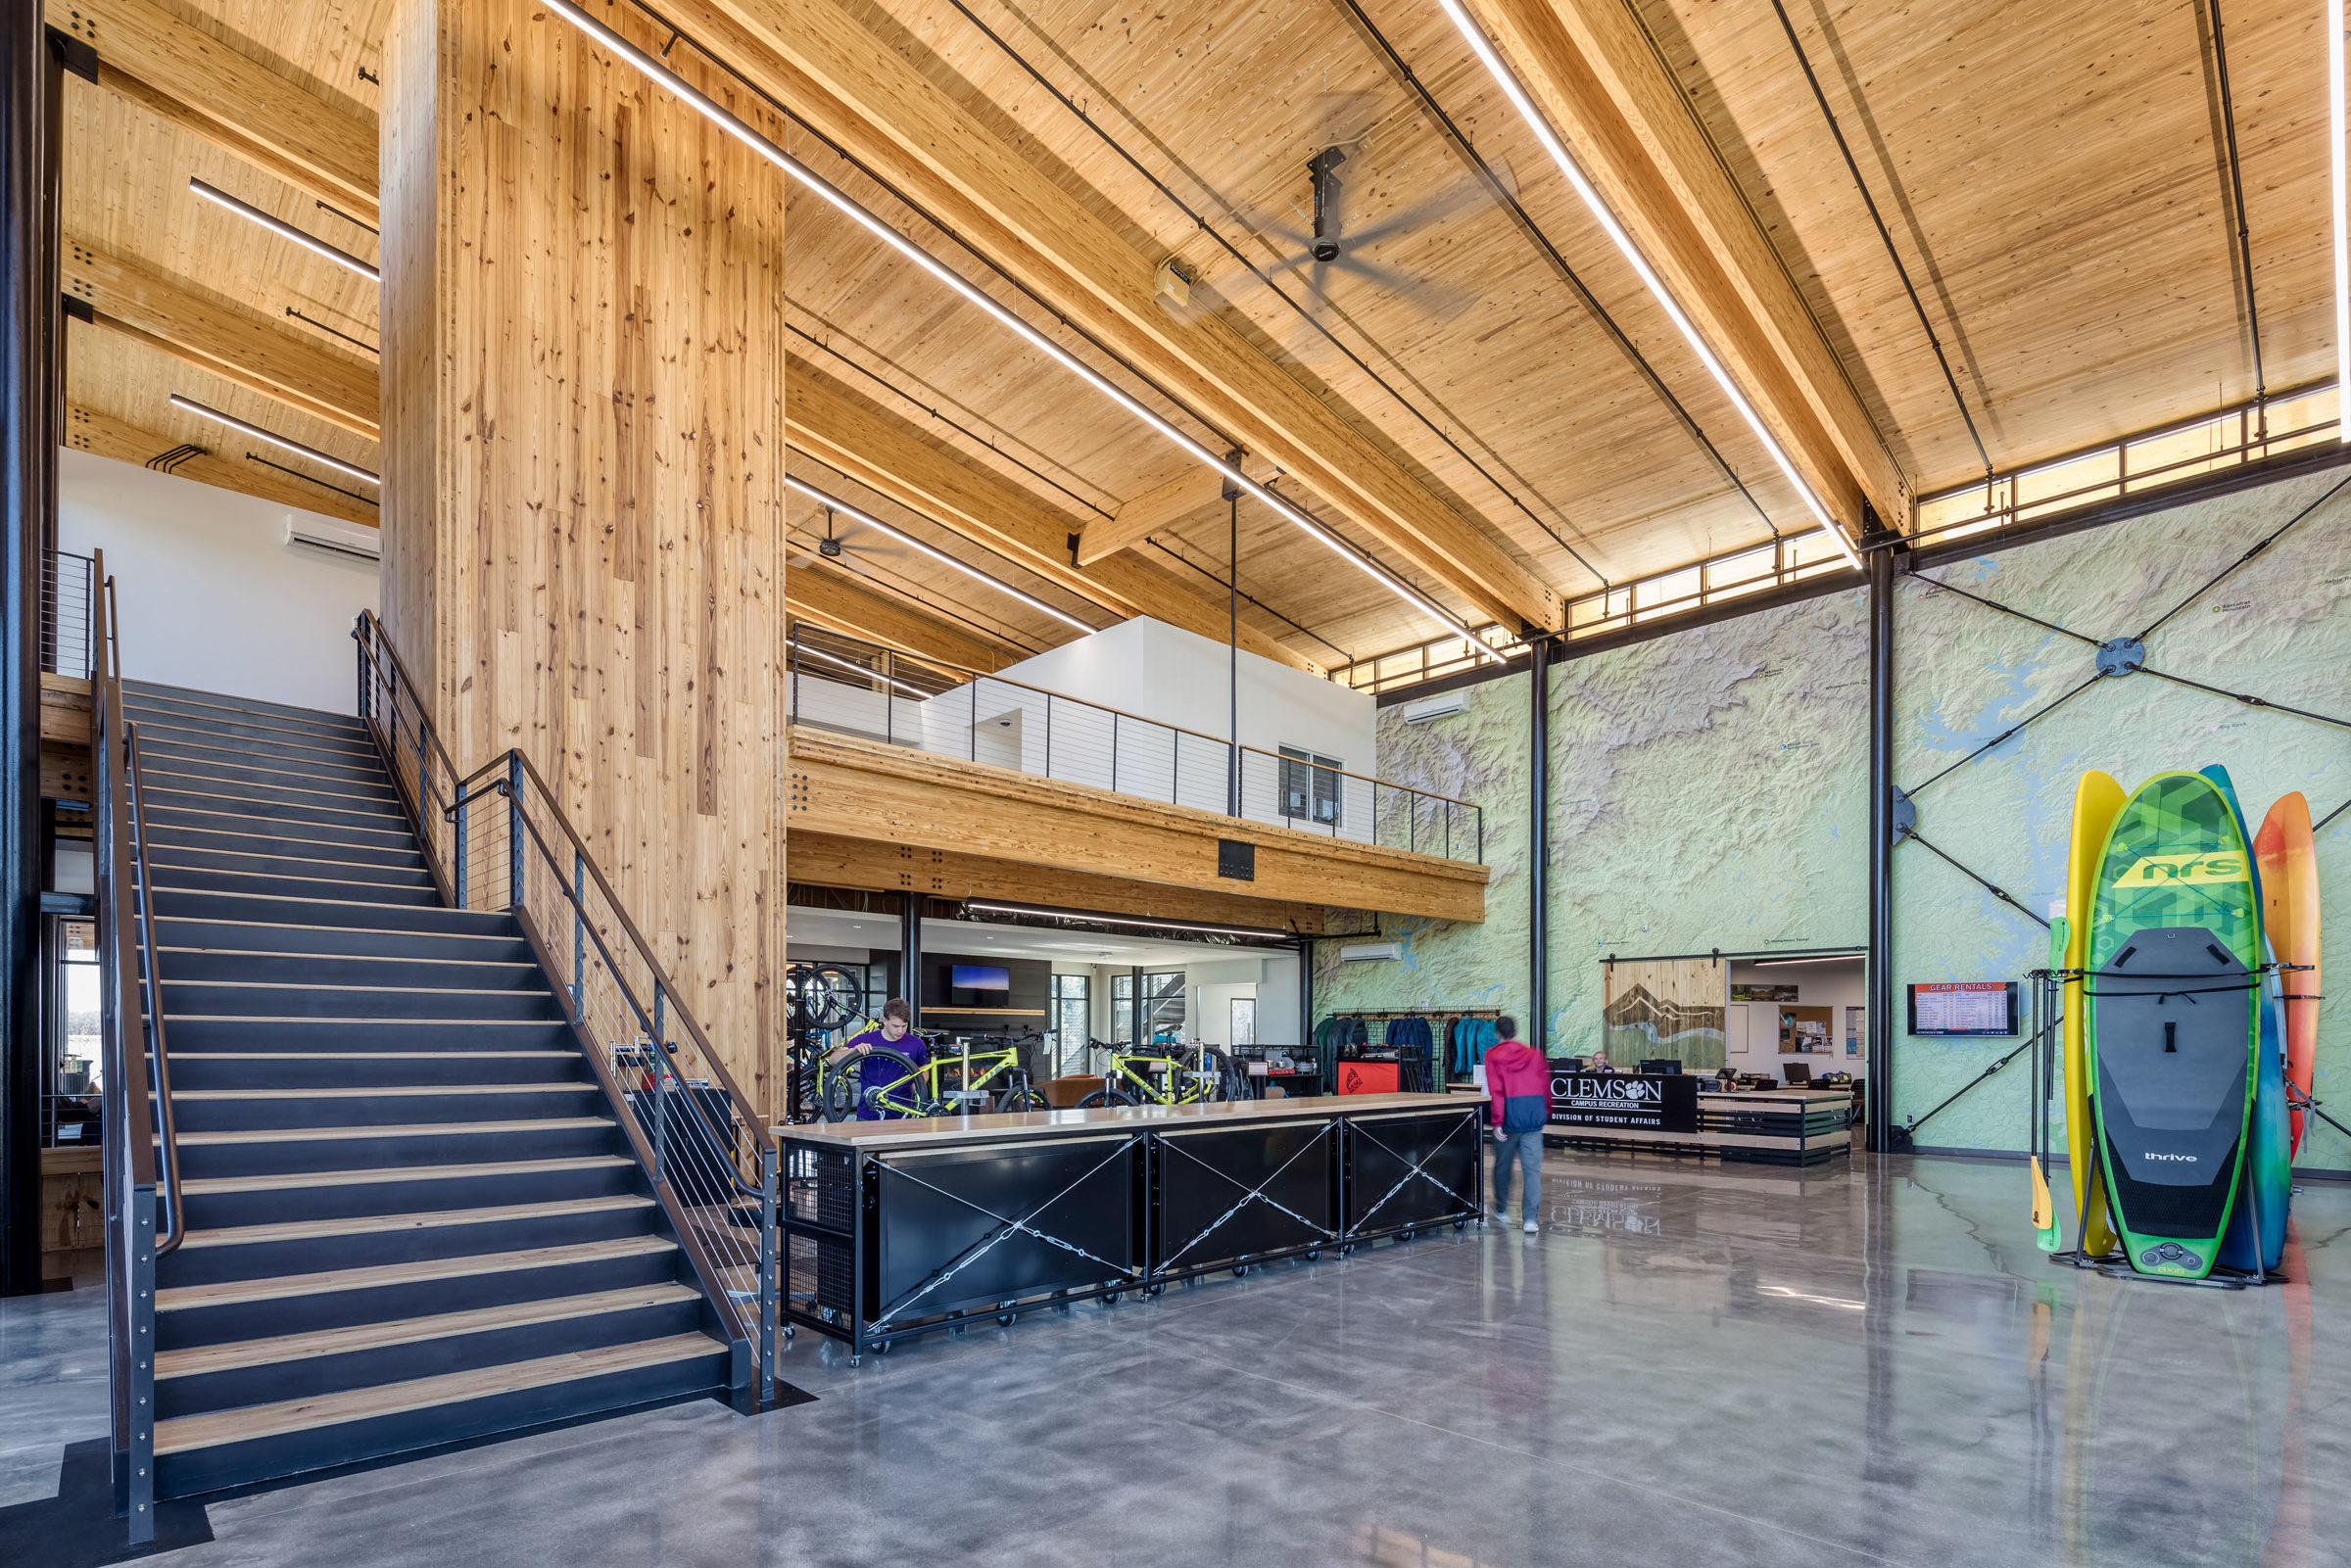 9 Mass Timber Projects Inspiring Change in the Industry